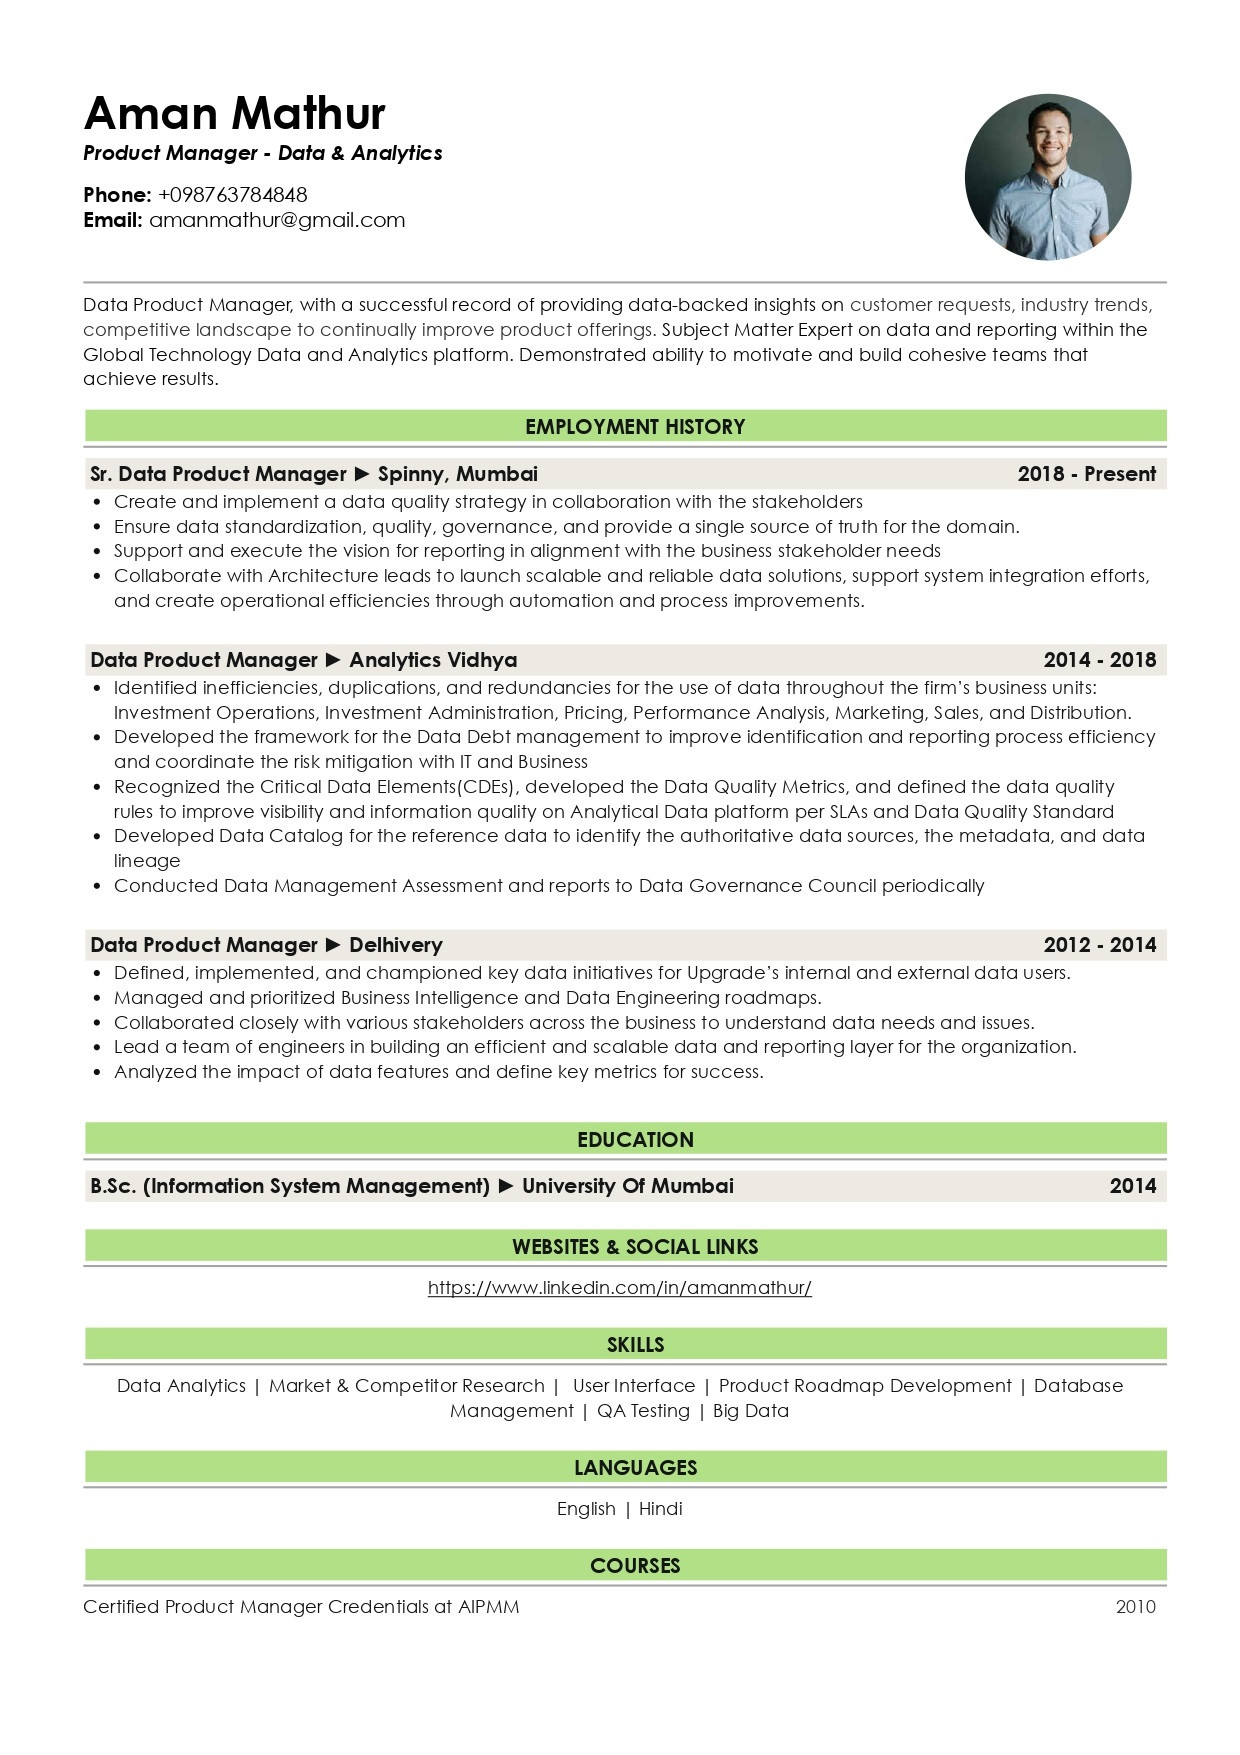 Reporting and Analytics Manager Sample Resume Sample Resume Of Data Product Manager with Template & Writing …